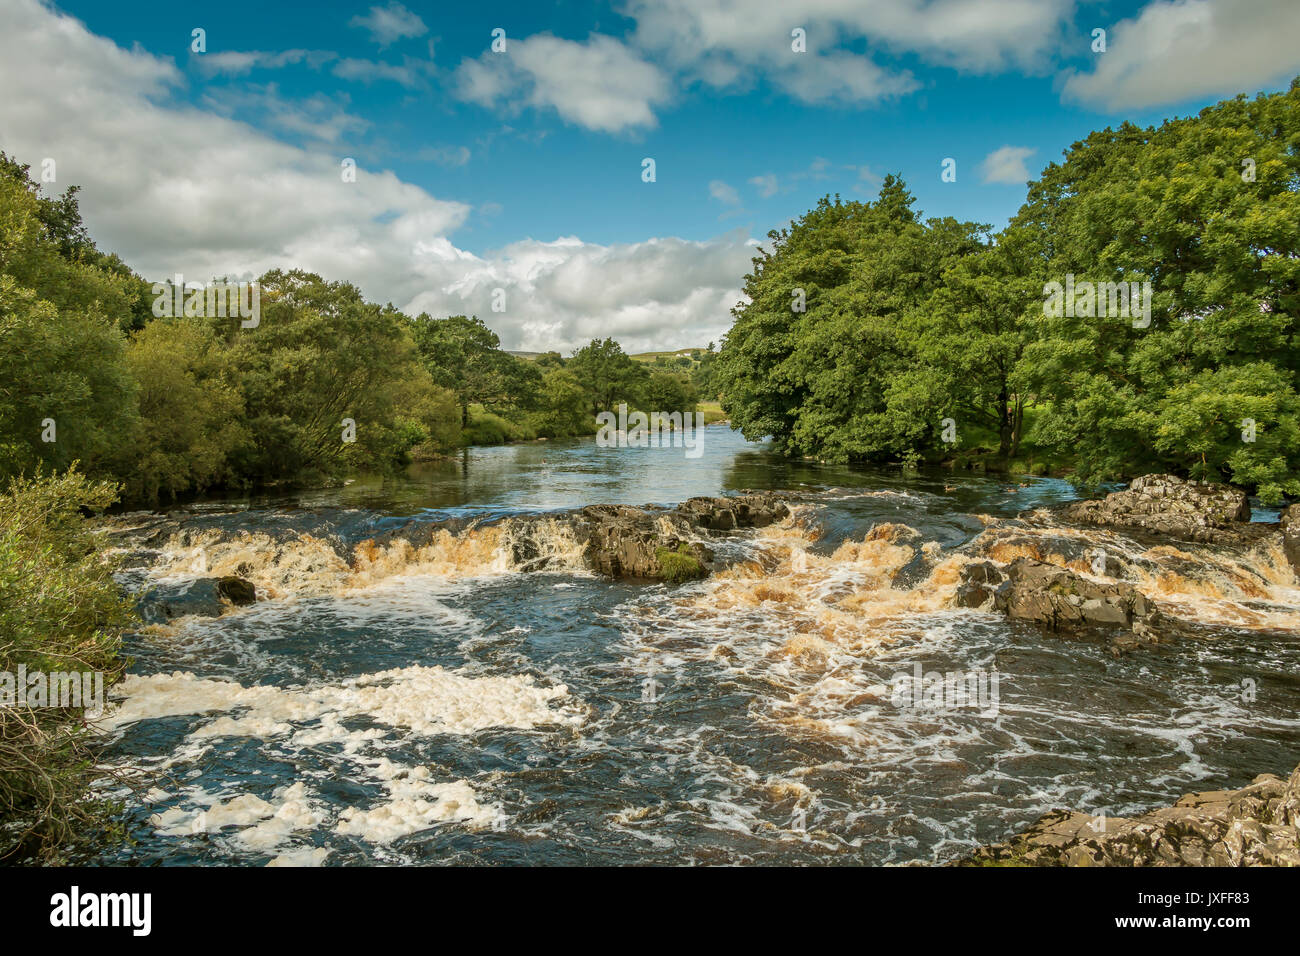 Teesdale Landscape, the river Tees between Low Force and High Force waterfalls, as seen from the Pennine Way long distance footpath, in summer Stock Photo